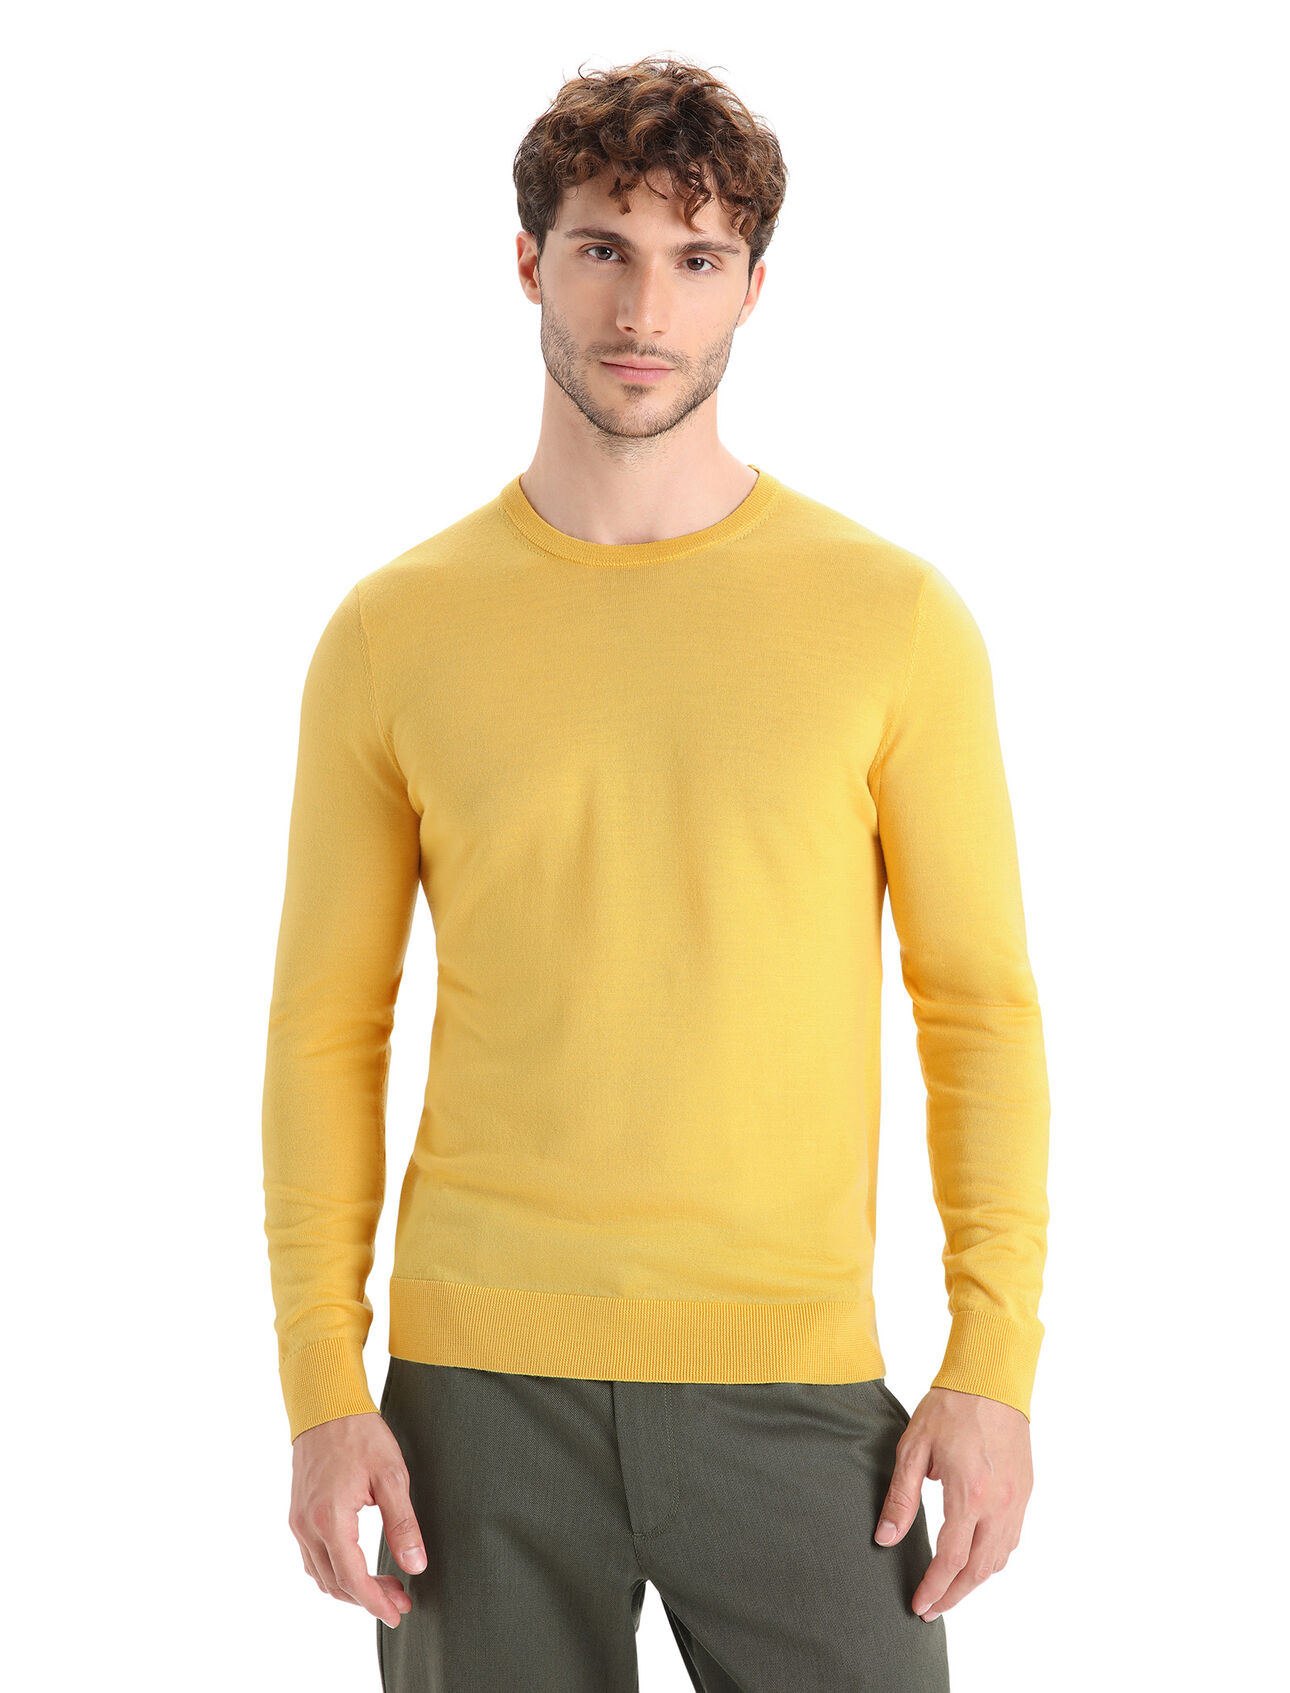 Mens Merino Wilcox Long Sleeve Sweater A classic everyday sweater made with ultra-fine gauge merino wool for unparalleled softness, the Wilcox Long Sleeve Sweater is perfect for days when you need a light extra layer.